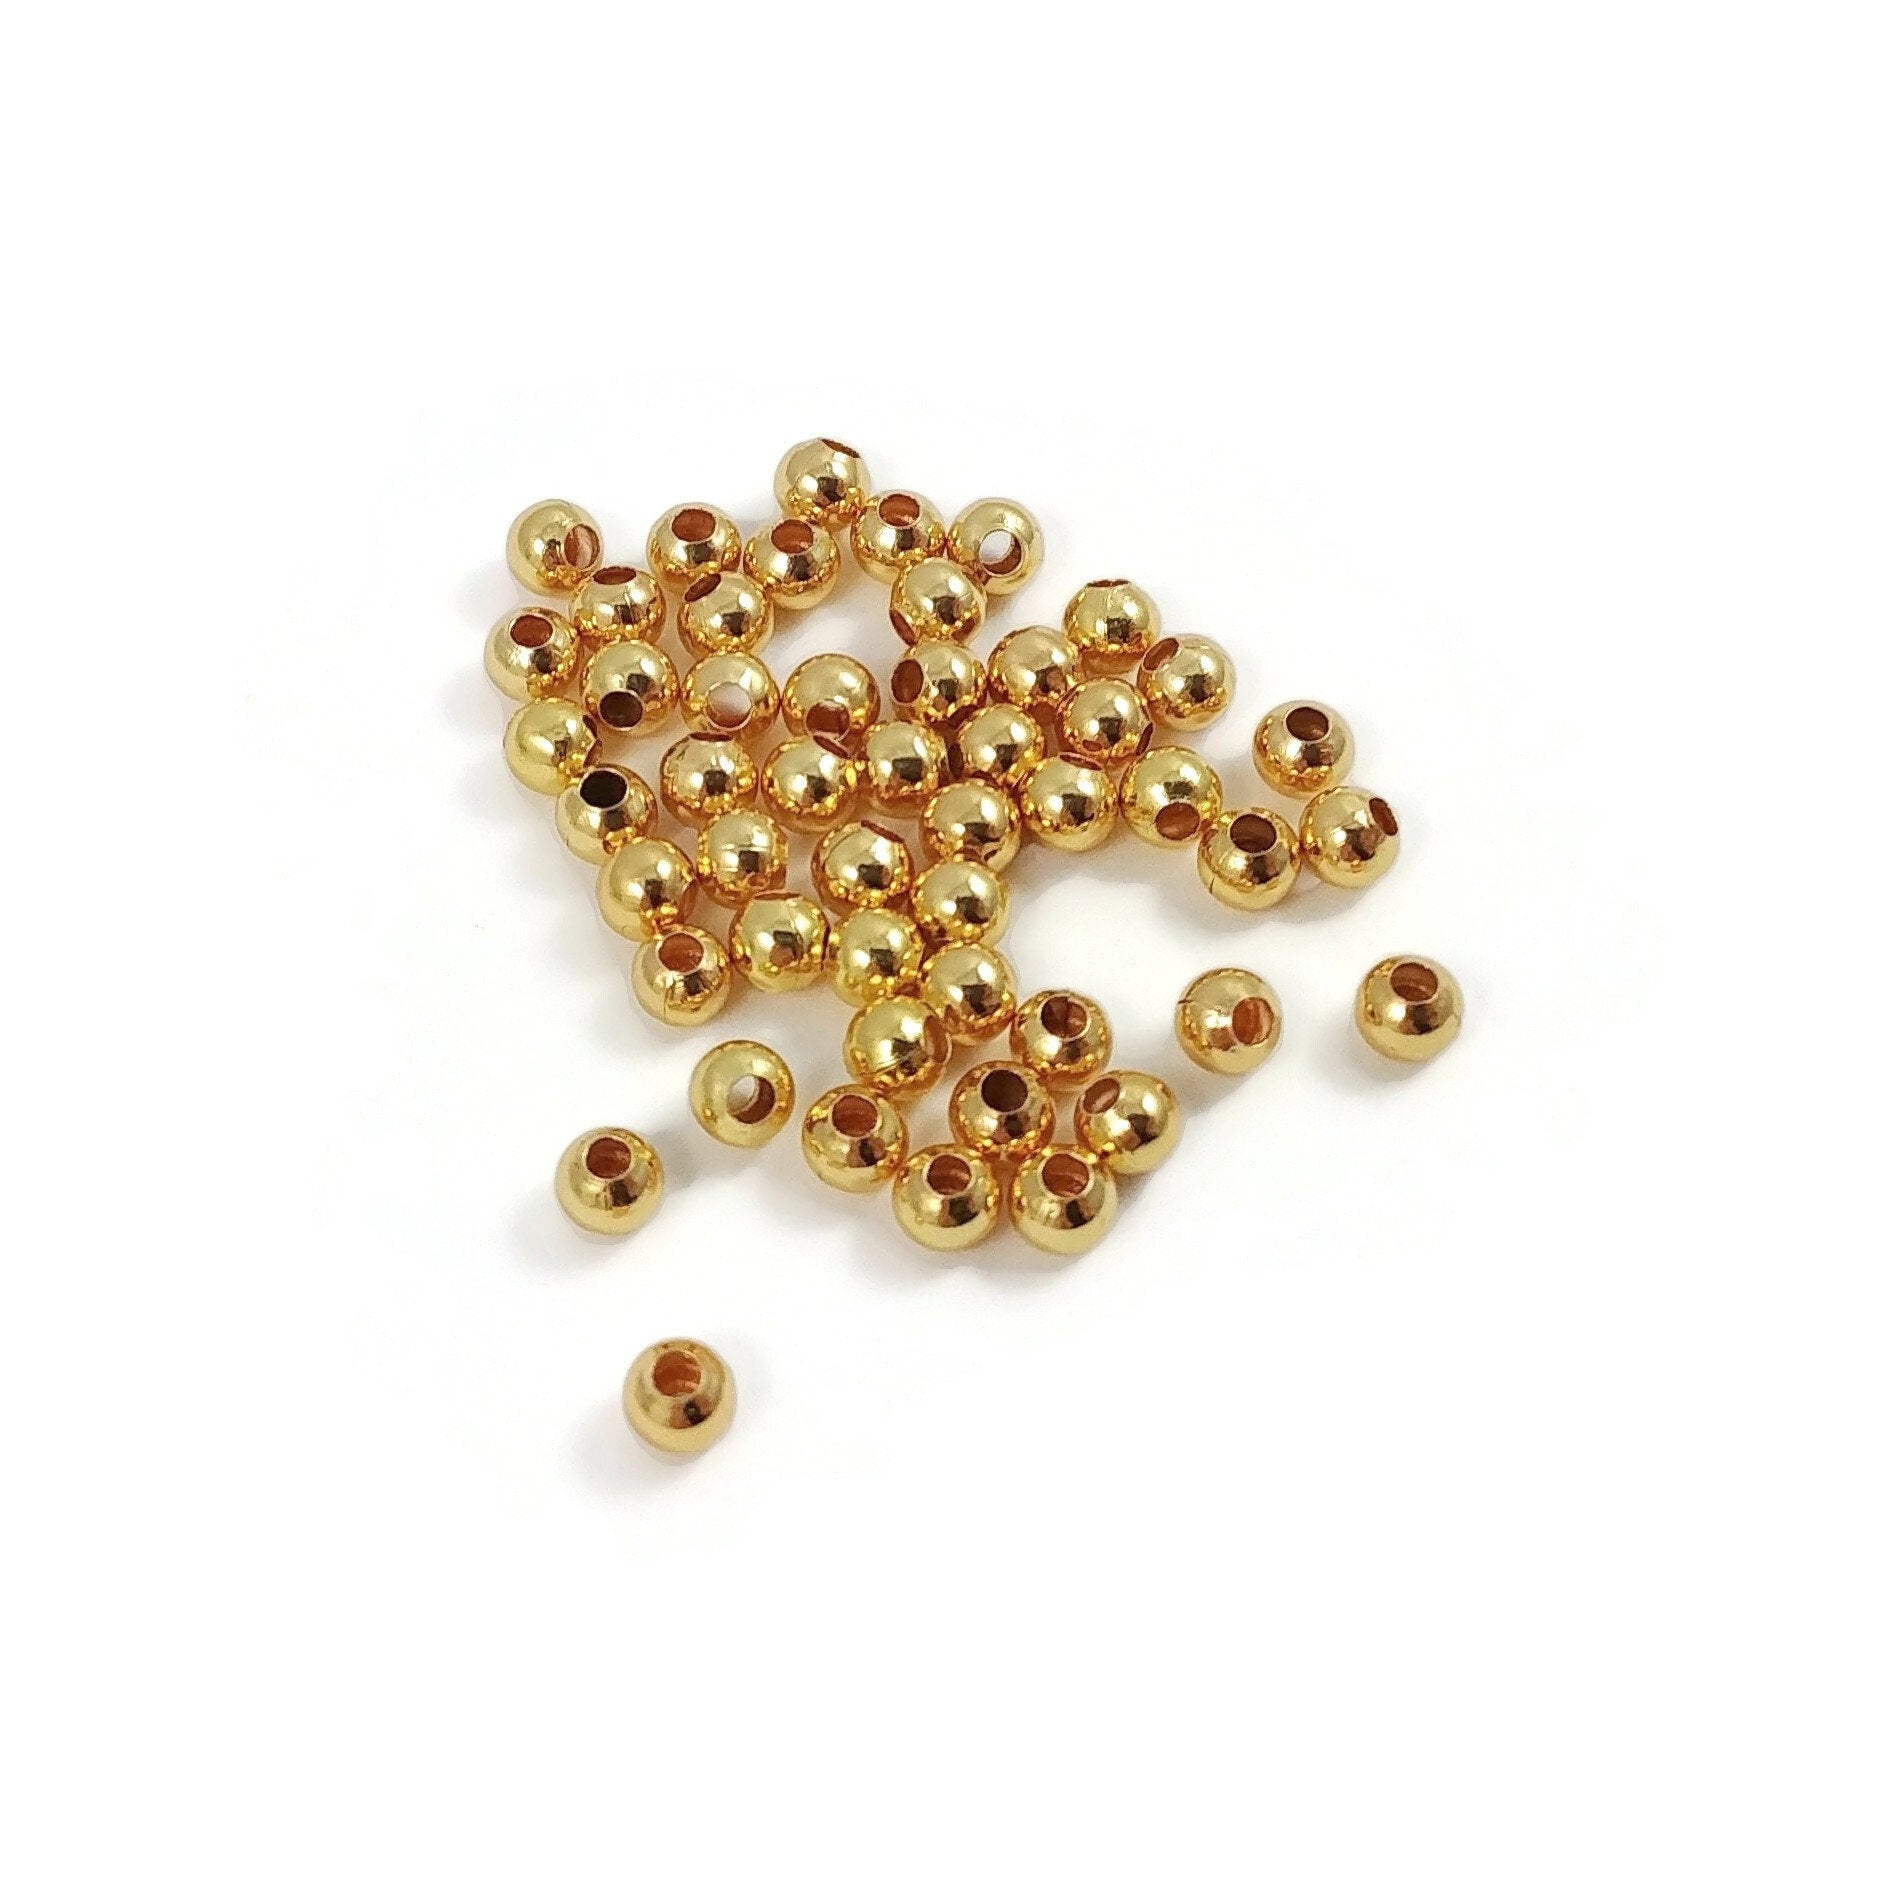 6mm 20pc Gold Balls Beads, Brushed Gold Spacer Beads for Jewelry Making,  Round Gold Beads, Gold Plated 